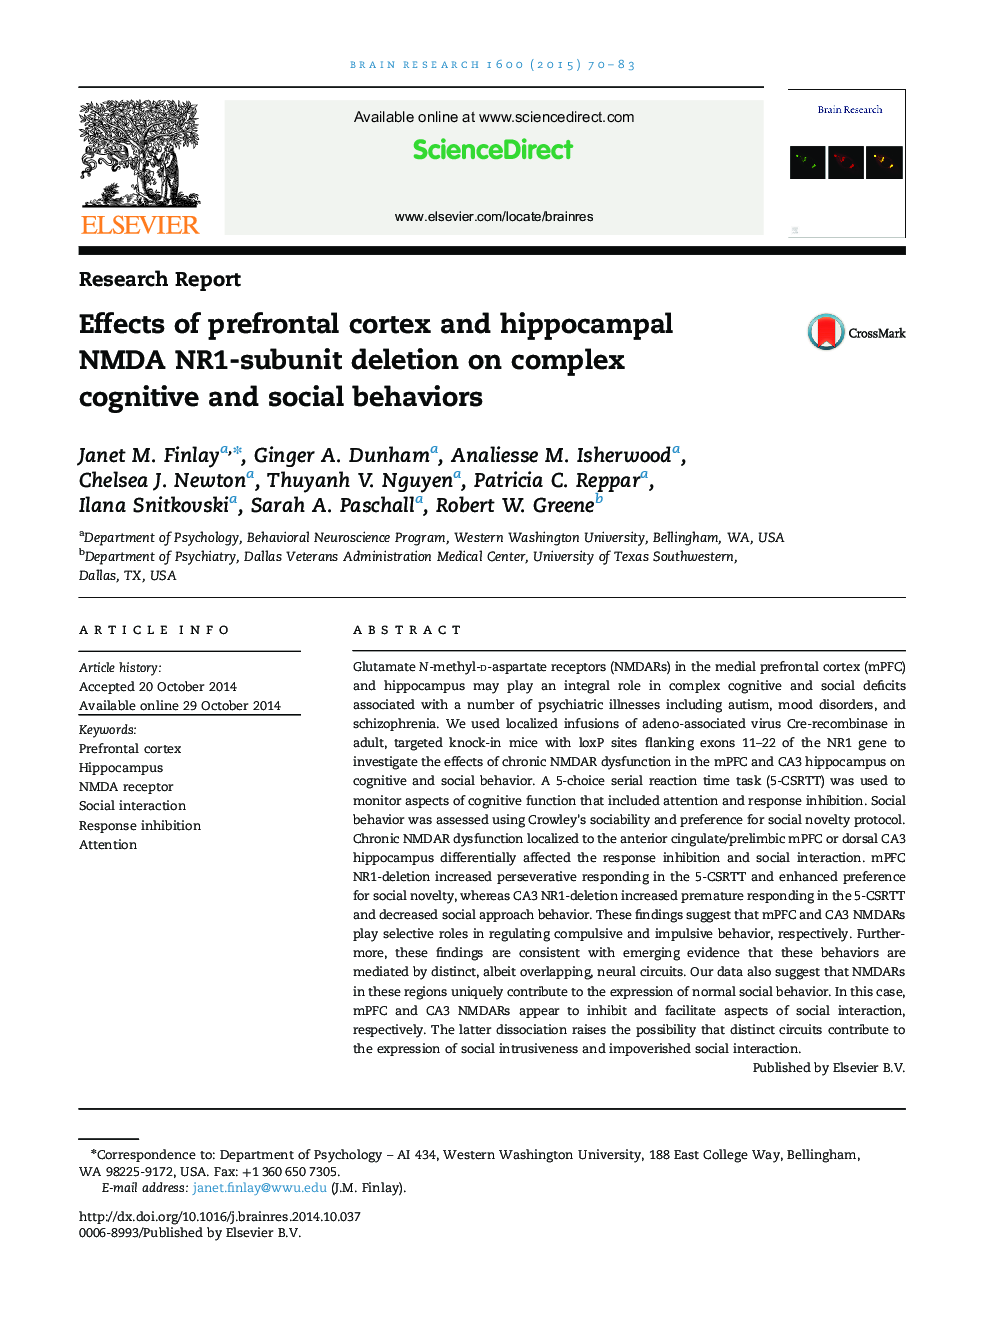 Research ReportEffects of prefrontal cortex and hippocampal NMDA NR1-subunit deletion on complex cognitive and social behaviors